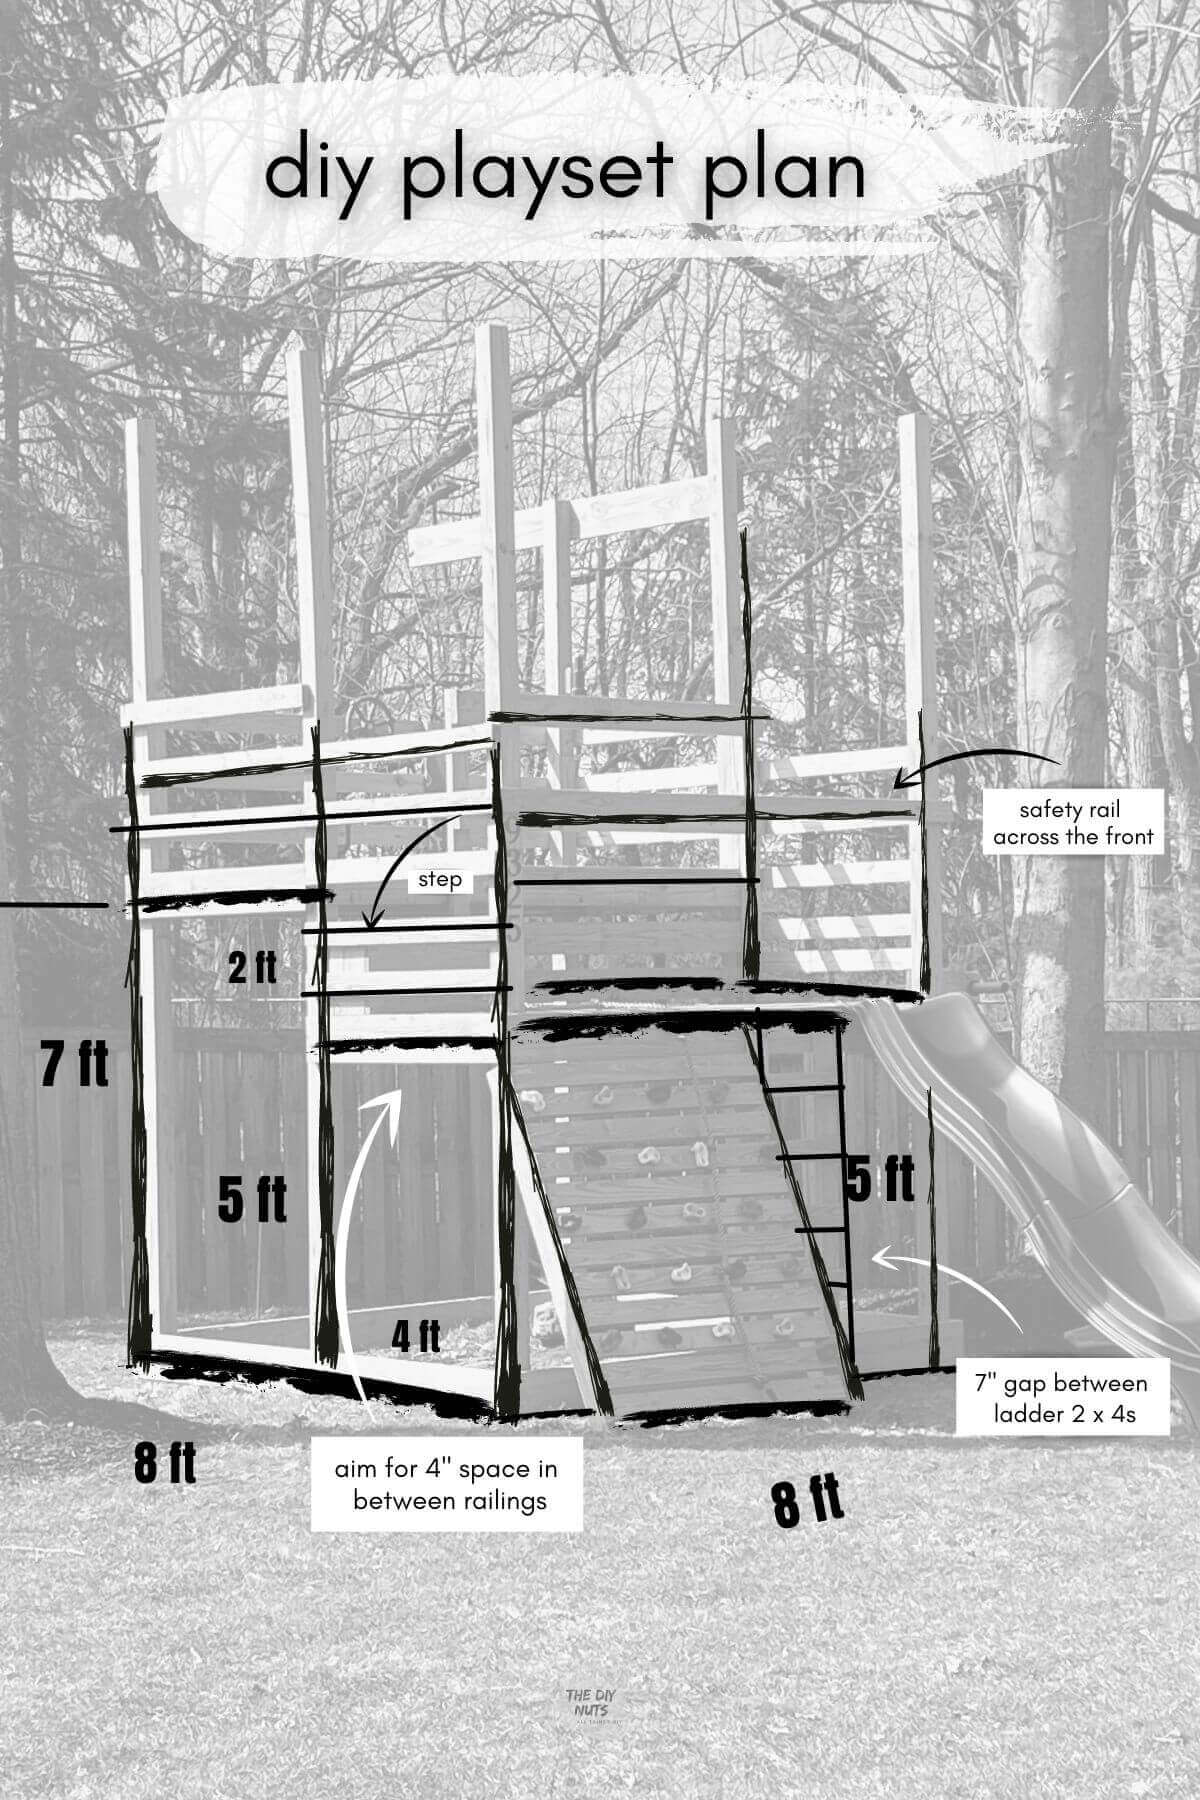 black and white image of DIY playset with black sketch lines showing measurements for DIY playground.